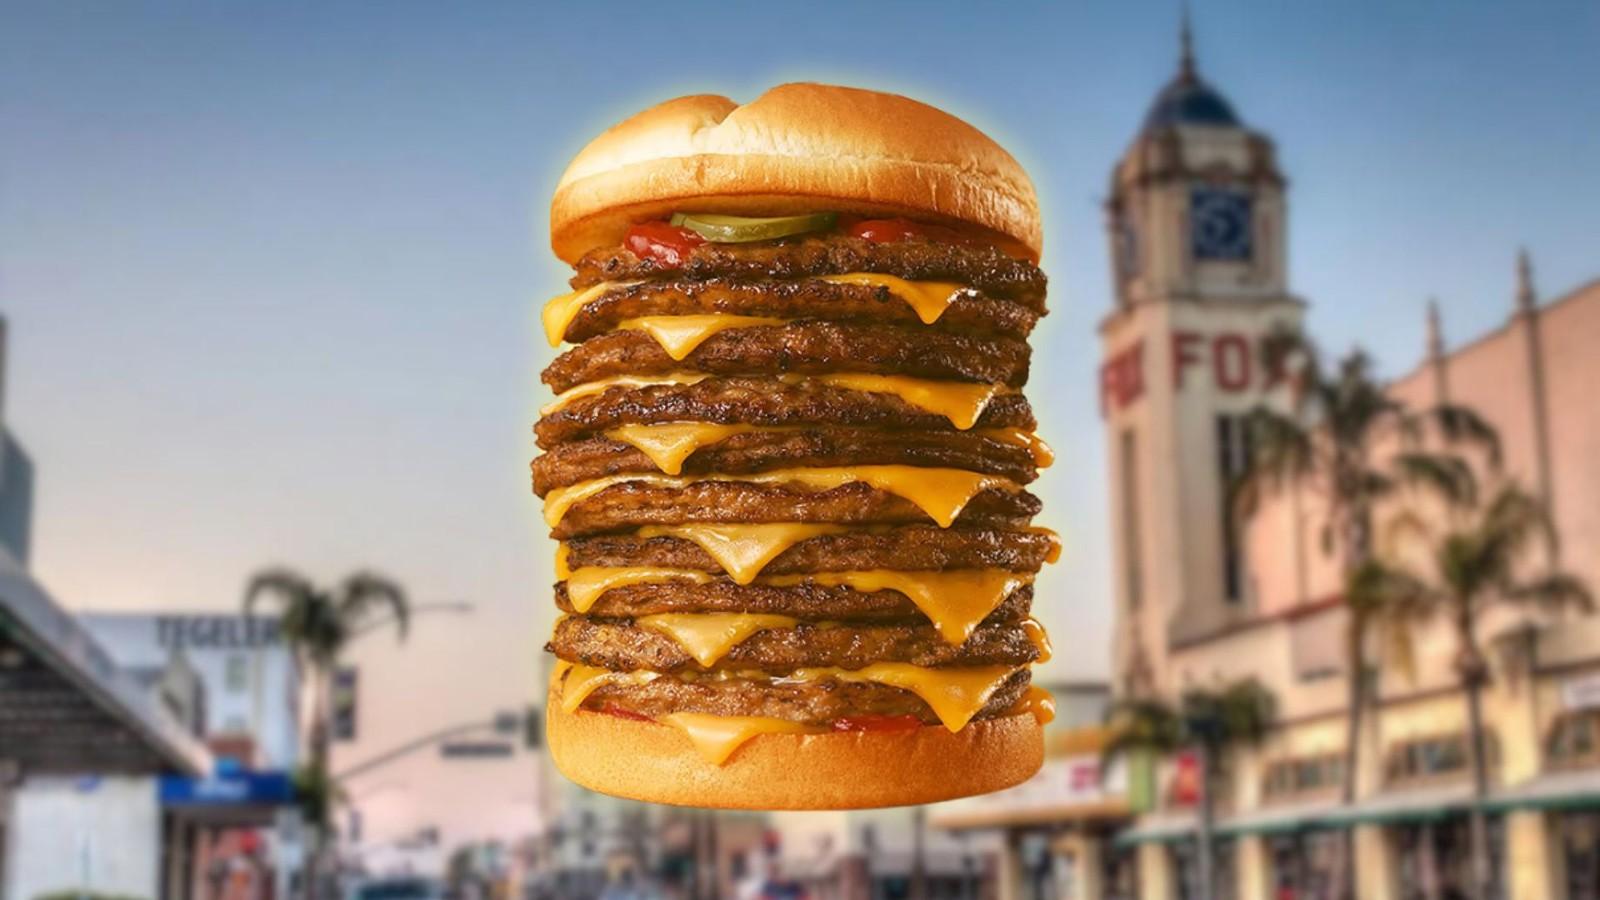 A fast food burger and the Bakersfield town